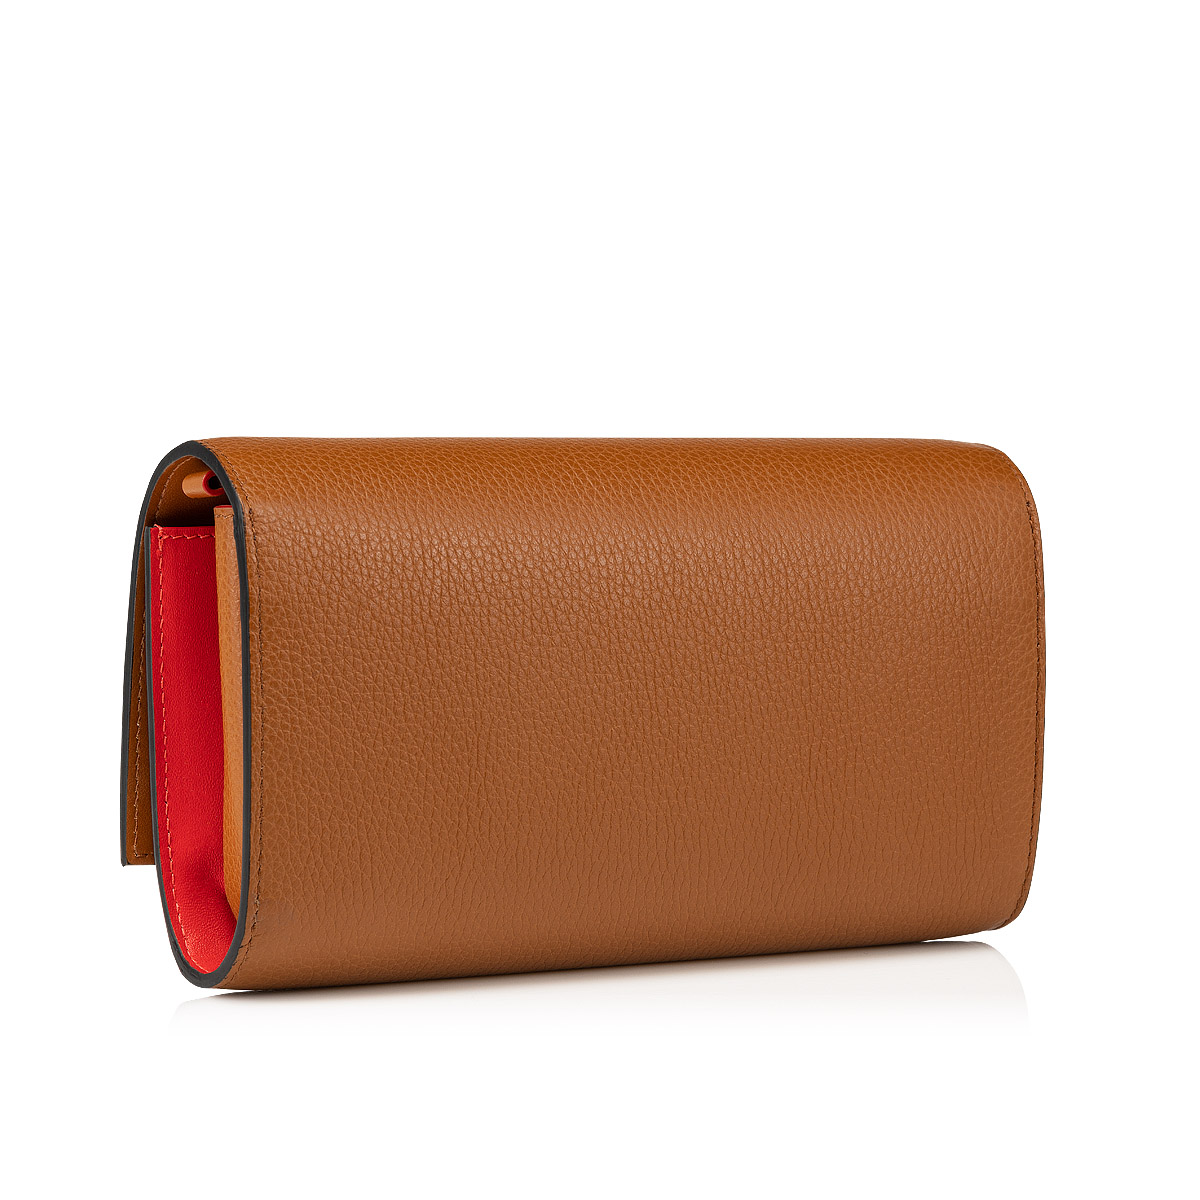 Coach envelope clutch in textured leather